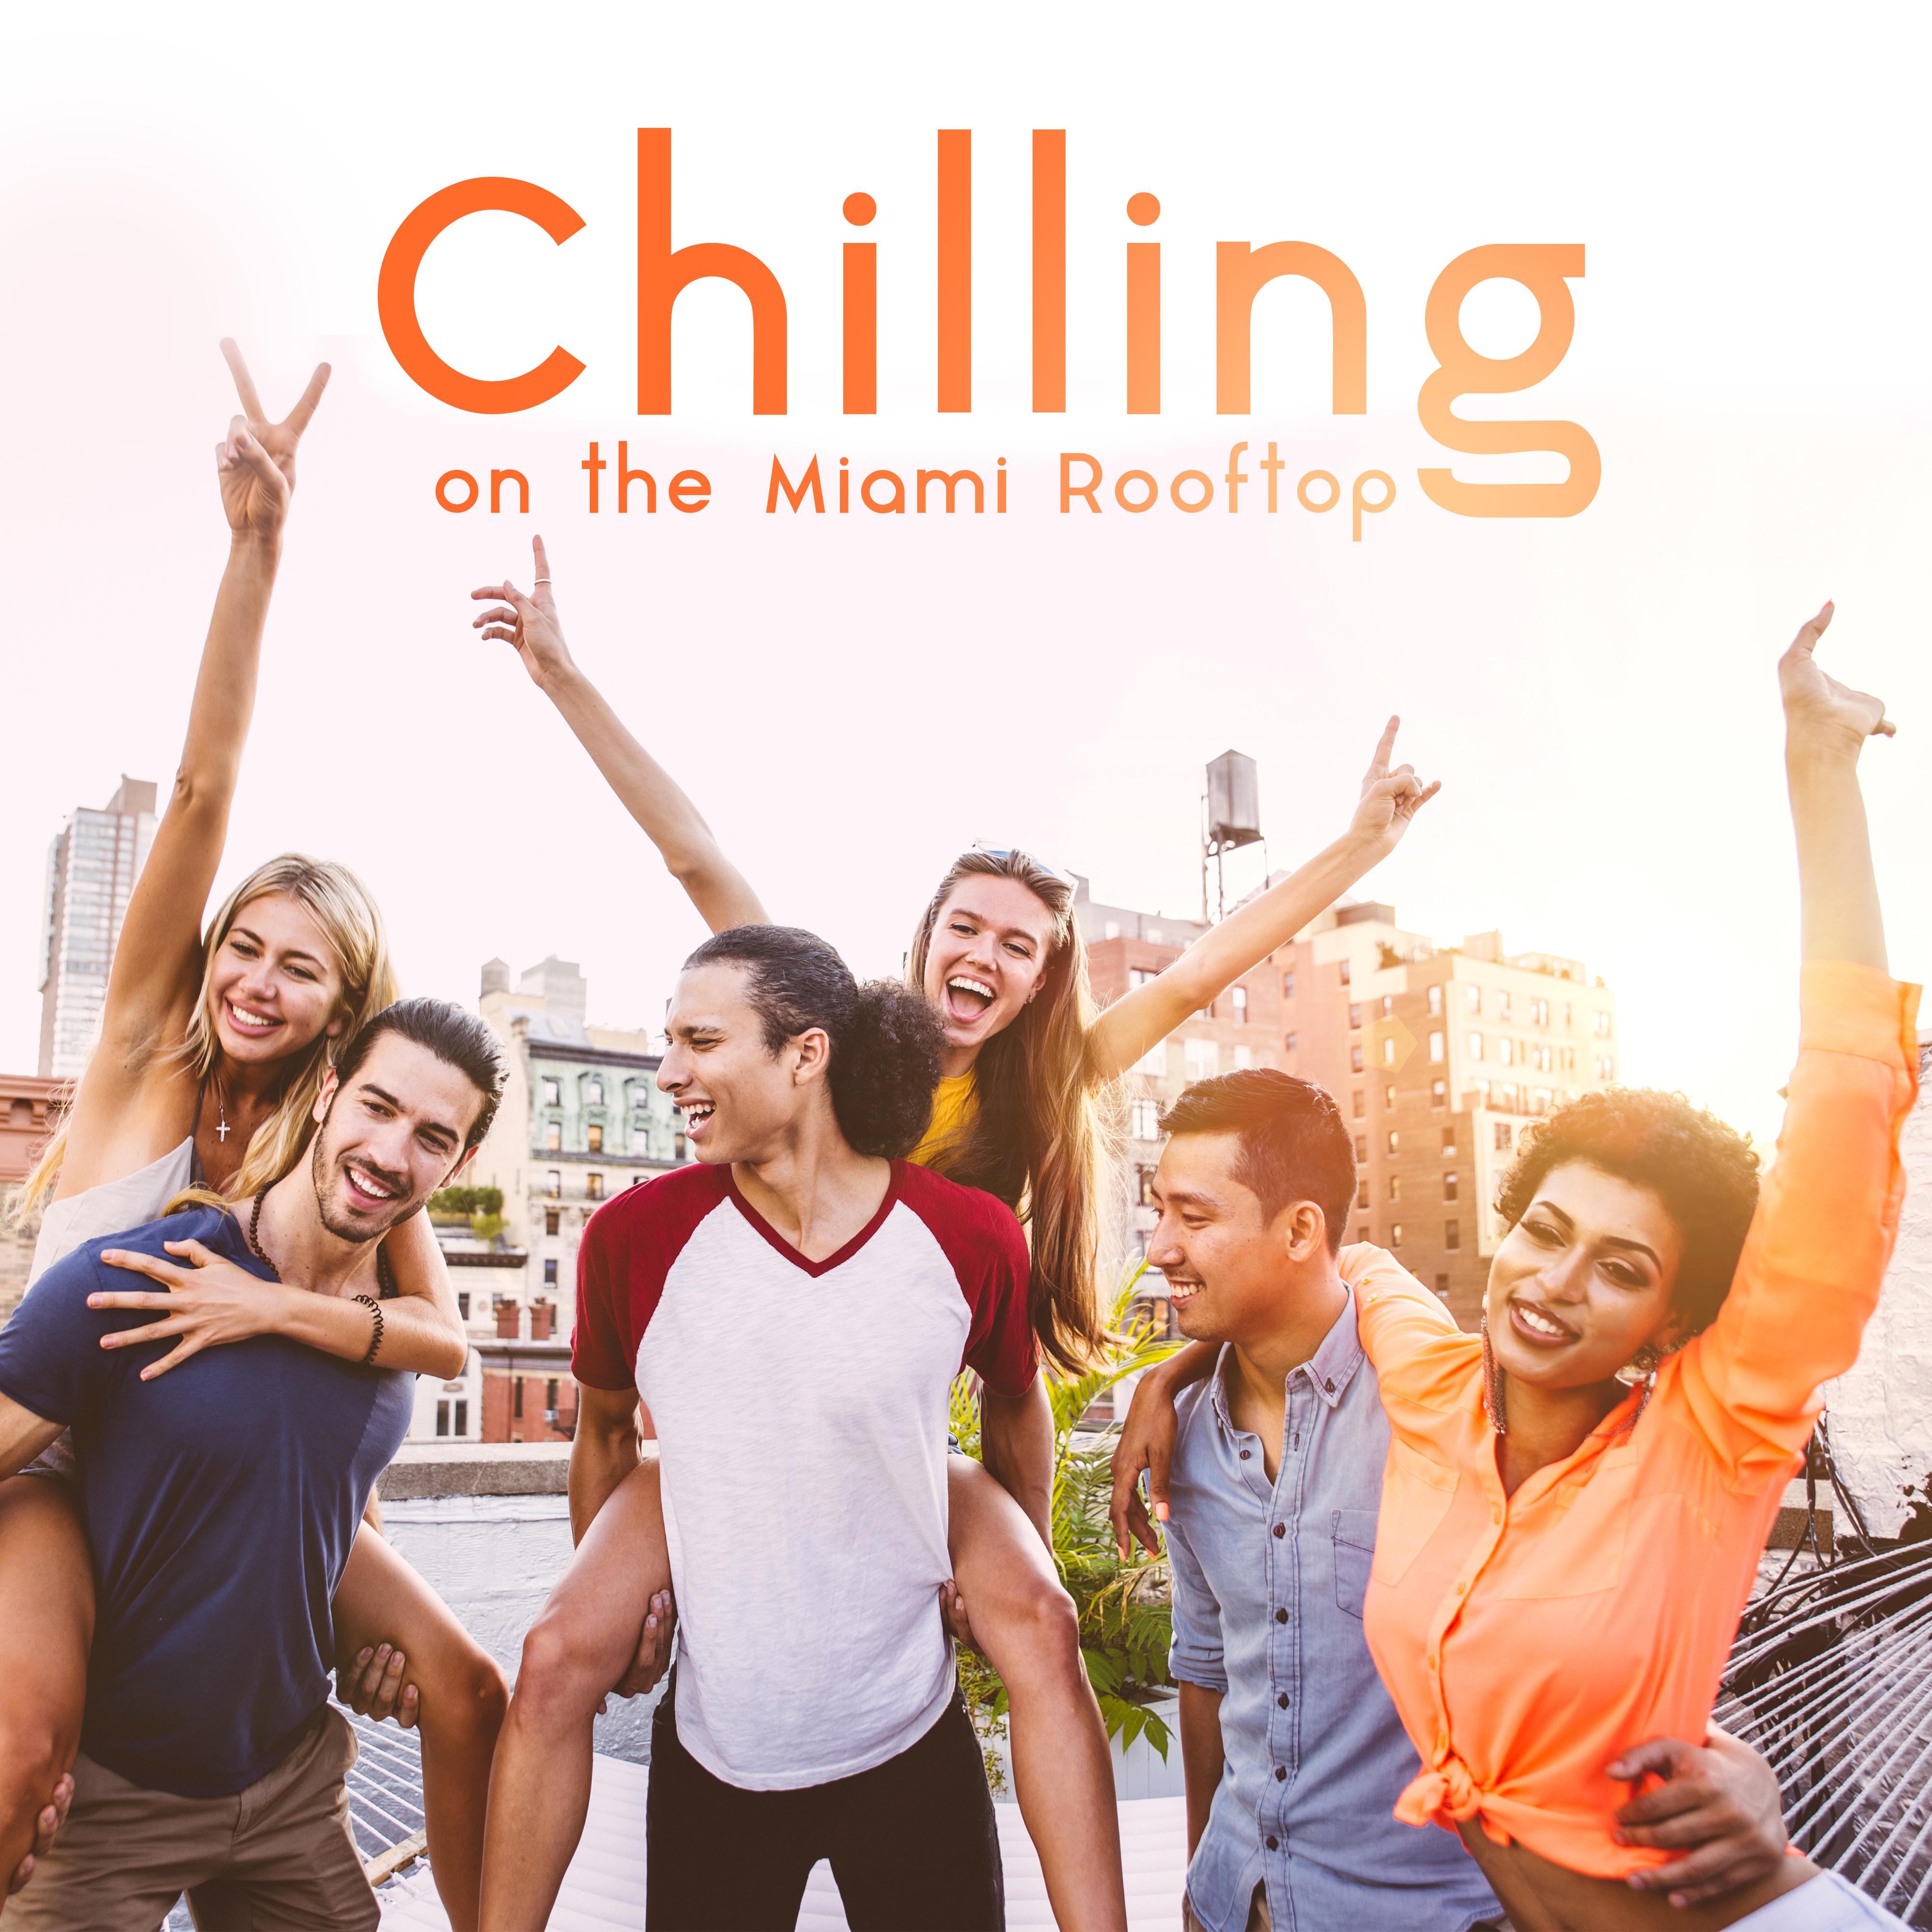 Chilling on the Miami Rooftop: 15 Best Chillout 2019 Songs, Total Relaxation Music, Calming Slow Beats, Positive Electronic Vibes